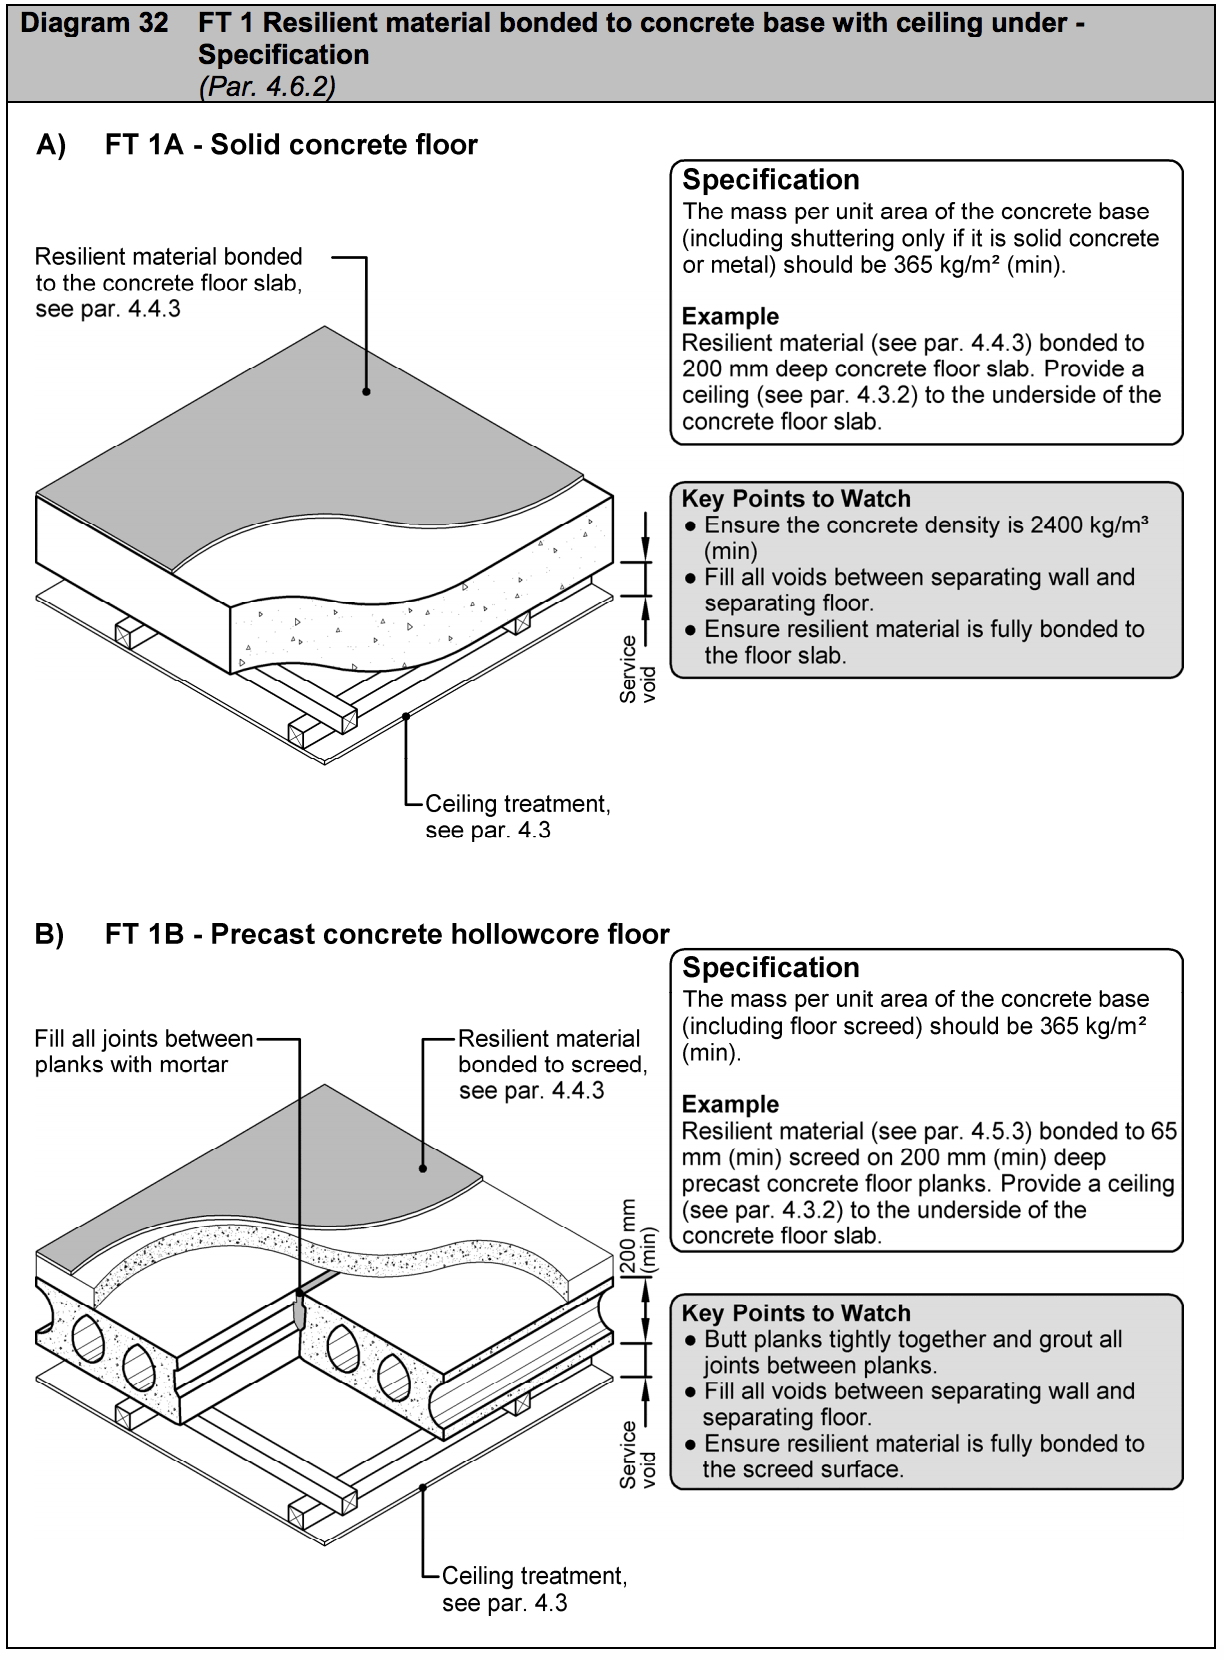 Diagram HE32 - FT 1 Resilient material bonded to concrete base with ceiling under - specification - Extract from TGD E